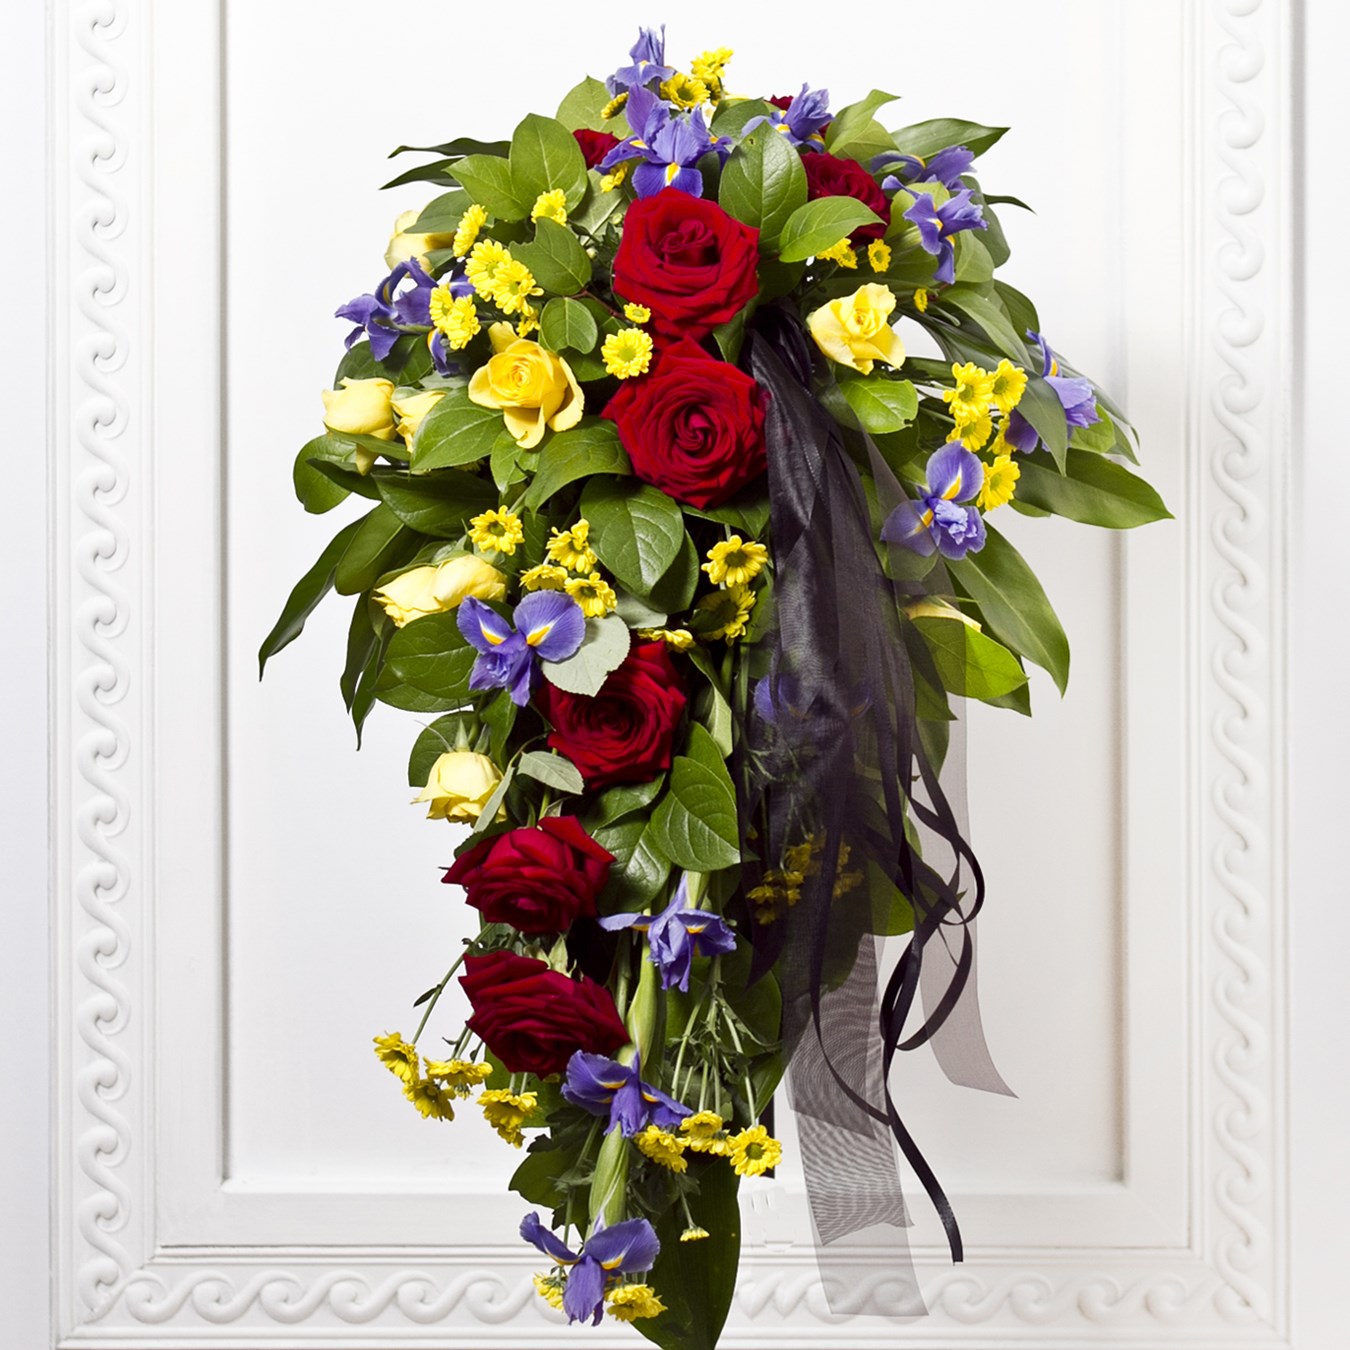 Funeral Bouquet with Colorful flowers and Ribbon